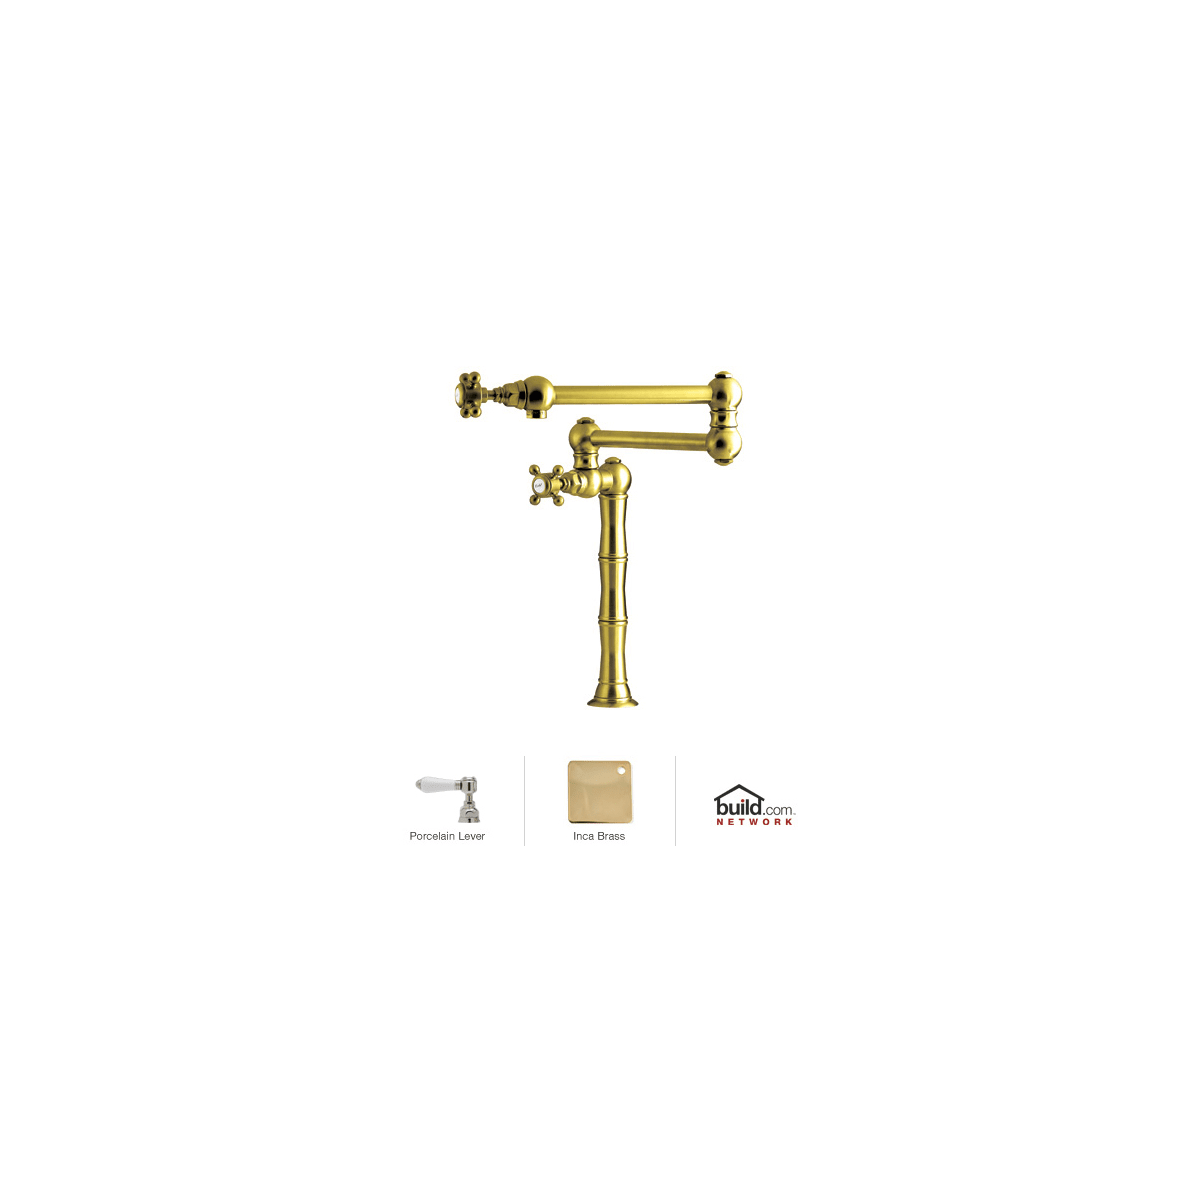 Rohl A1452LPIB-2 Country Kitchen Deck Mounted Pot Filler Faucet with Porcelain Lever, Inca Brass - 1